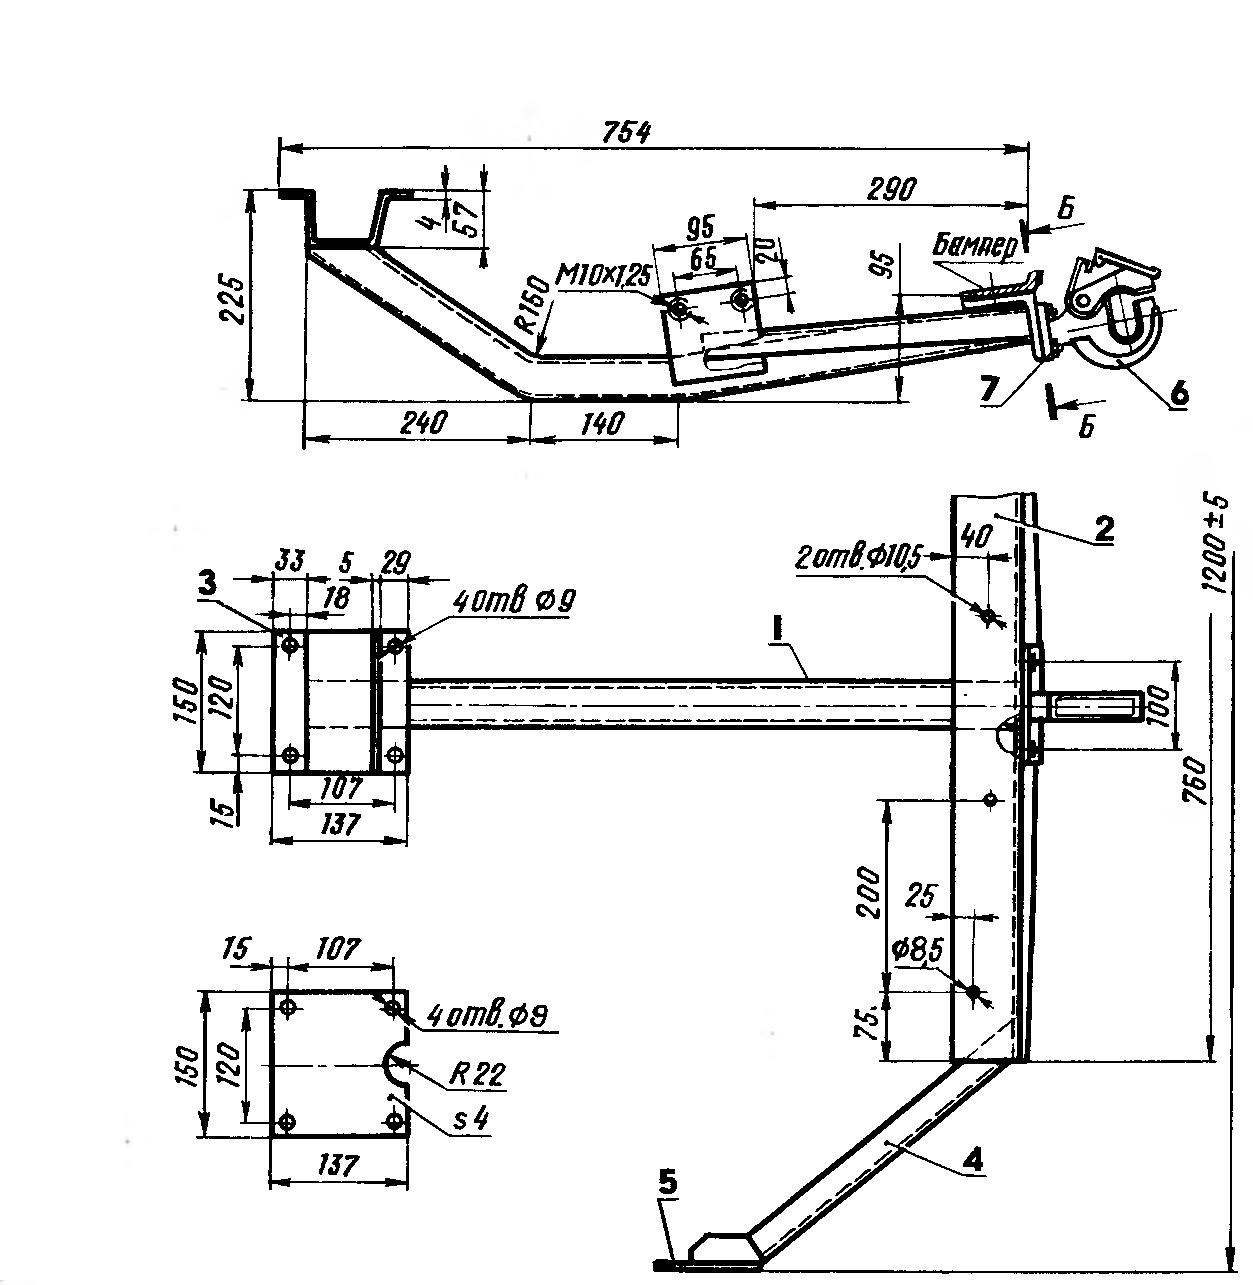  R and p. 2. Towing device